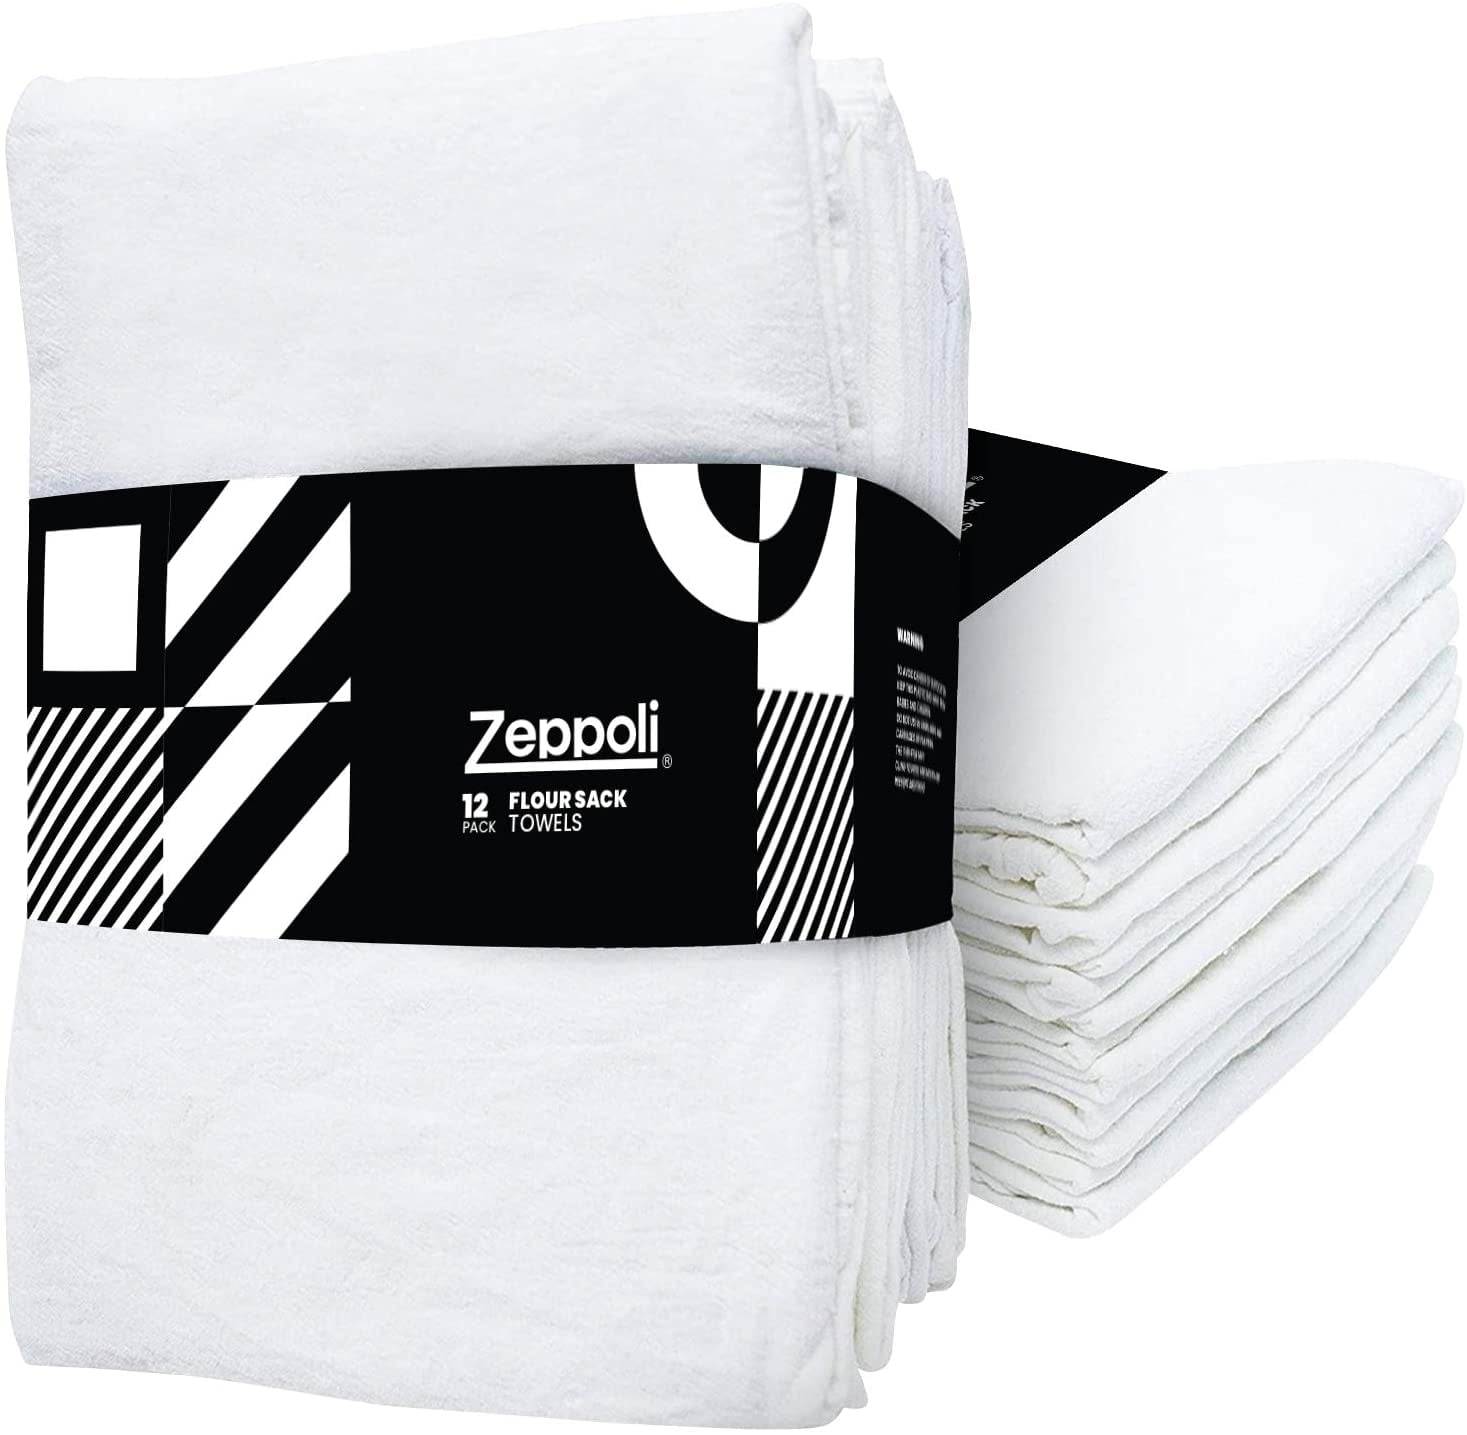 Zeppoli Dish Towels - Pack of 15-14 by 25 - Cotton Material - Kitchen Hand Towels - Super Absorbent - Reusable Cleaning Cloths - Machine Washable